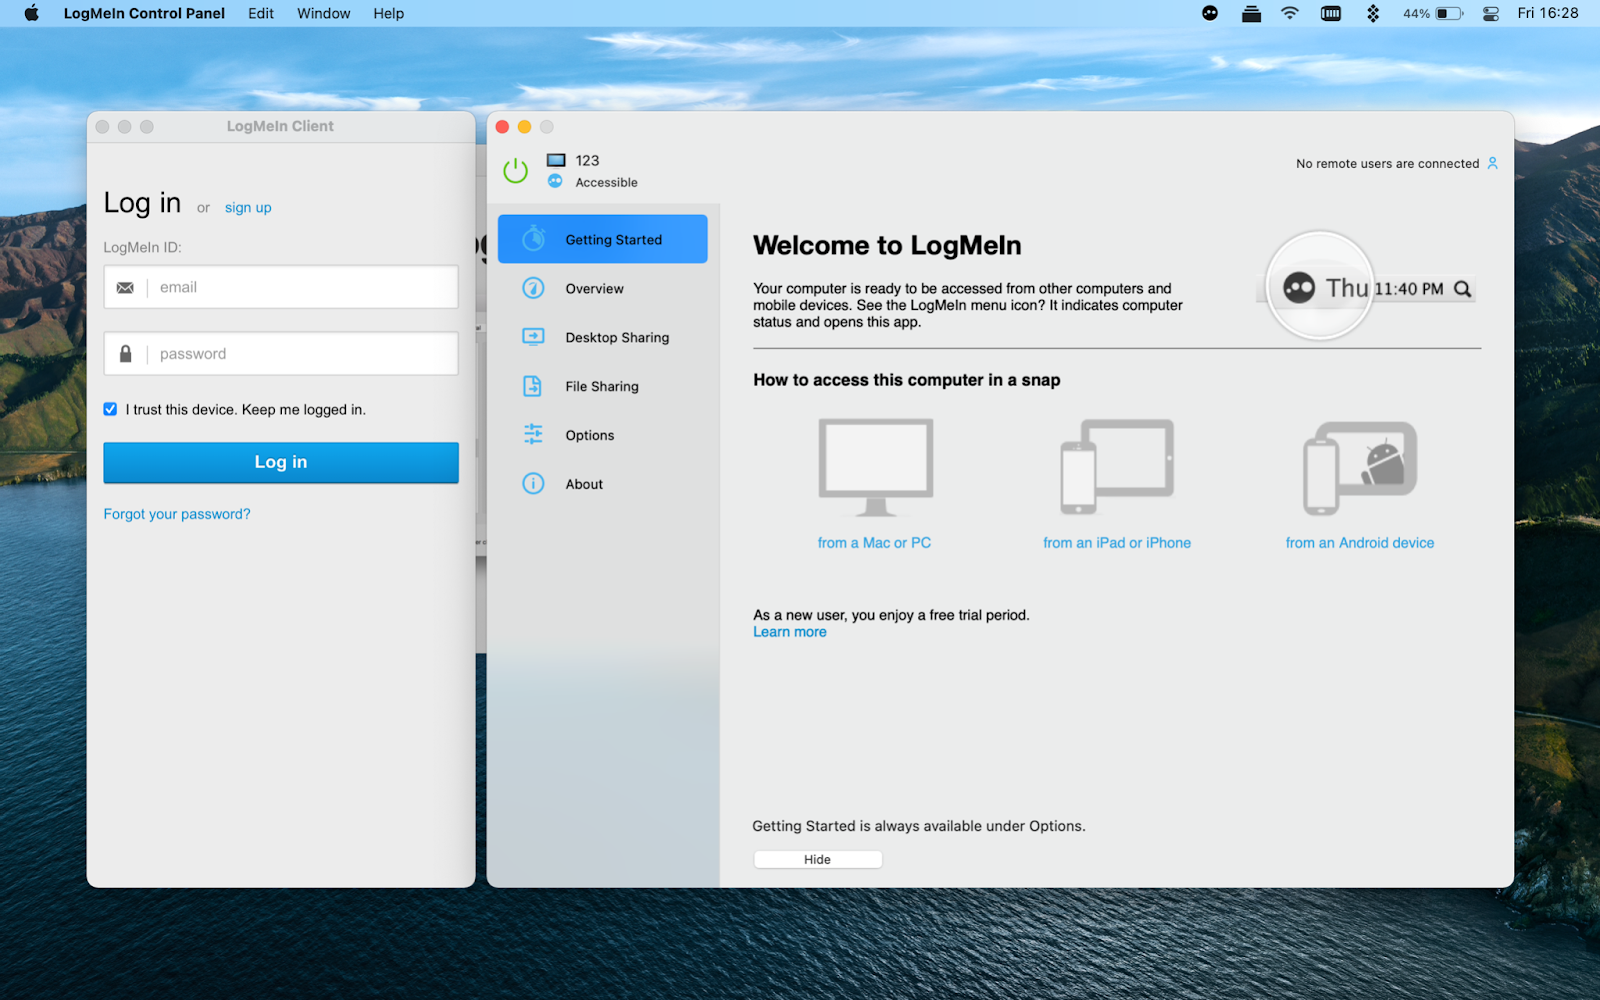 teamviewer app for mac adds duplicate icon in dock on startup